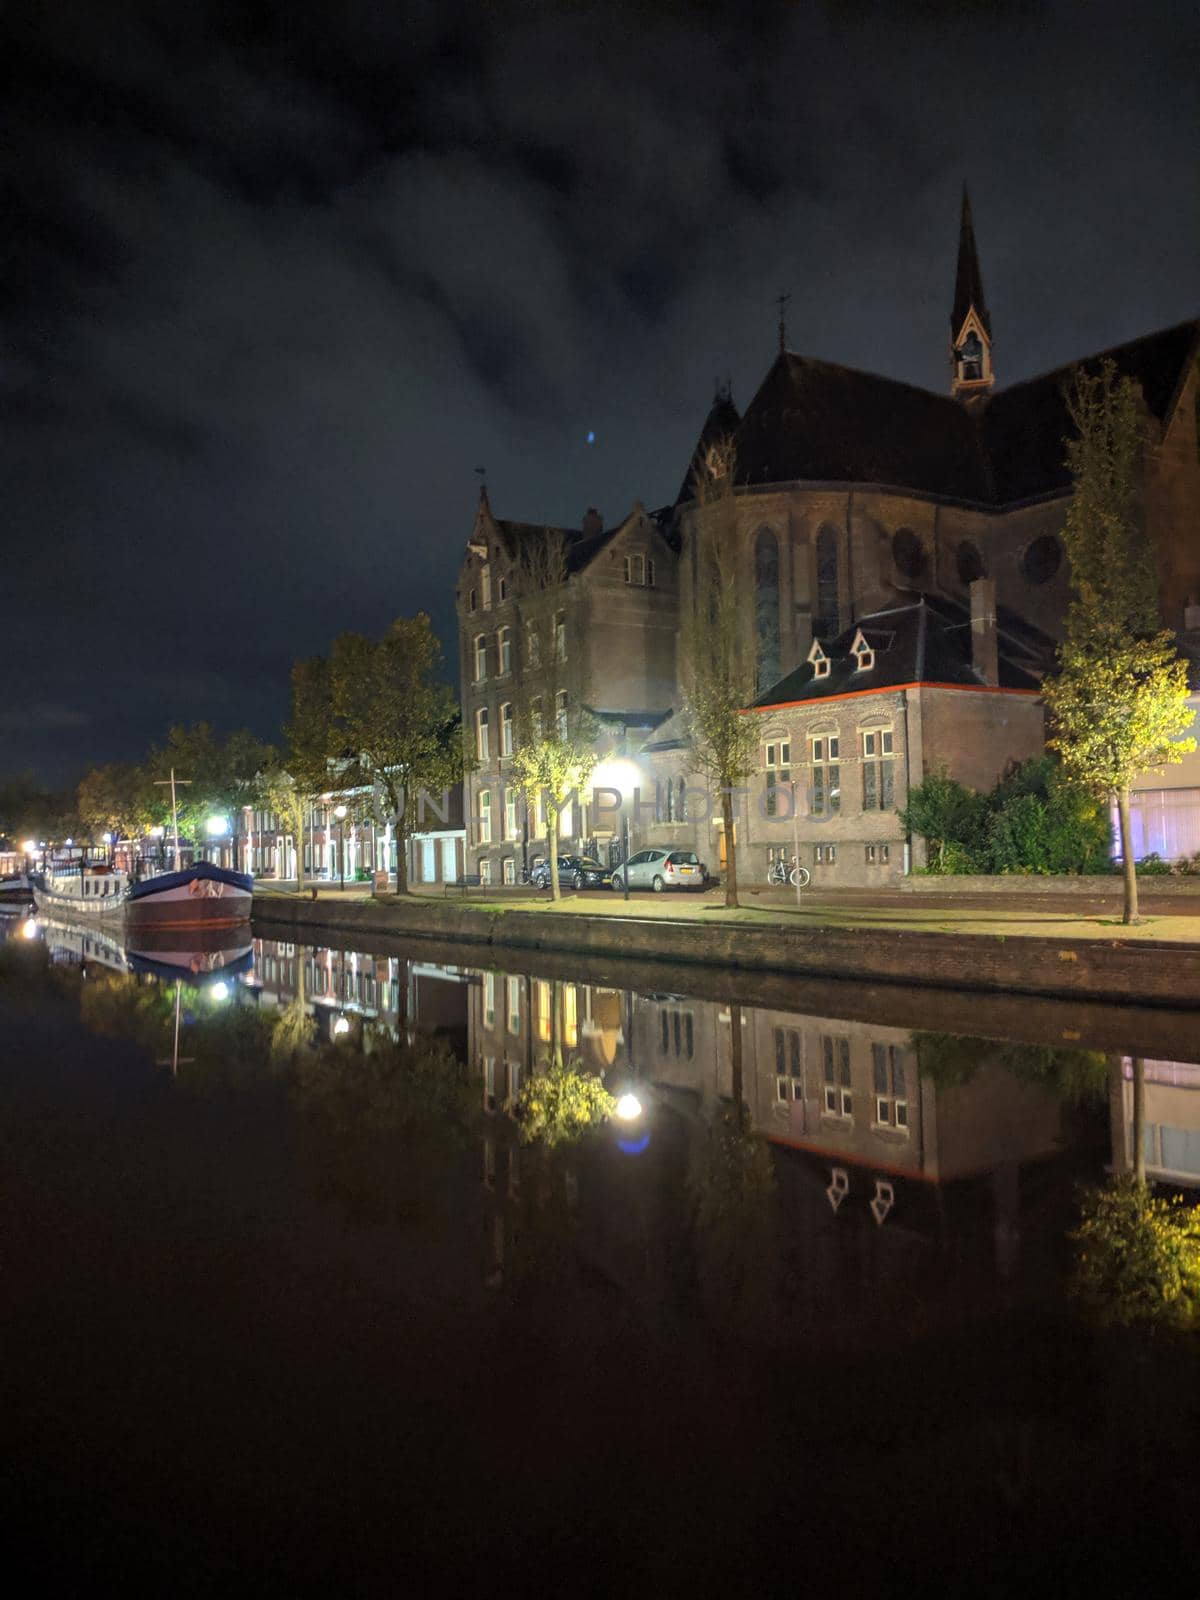 Church along the canal at night in Sneek, Friesland, The Netherlands